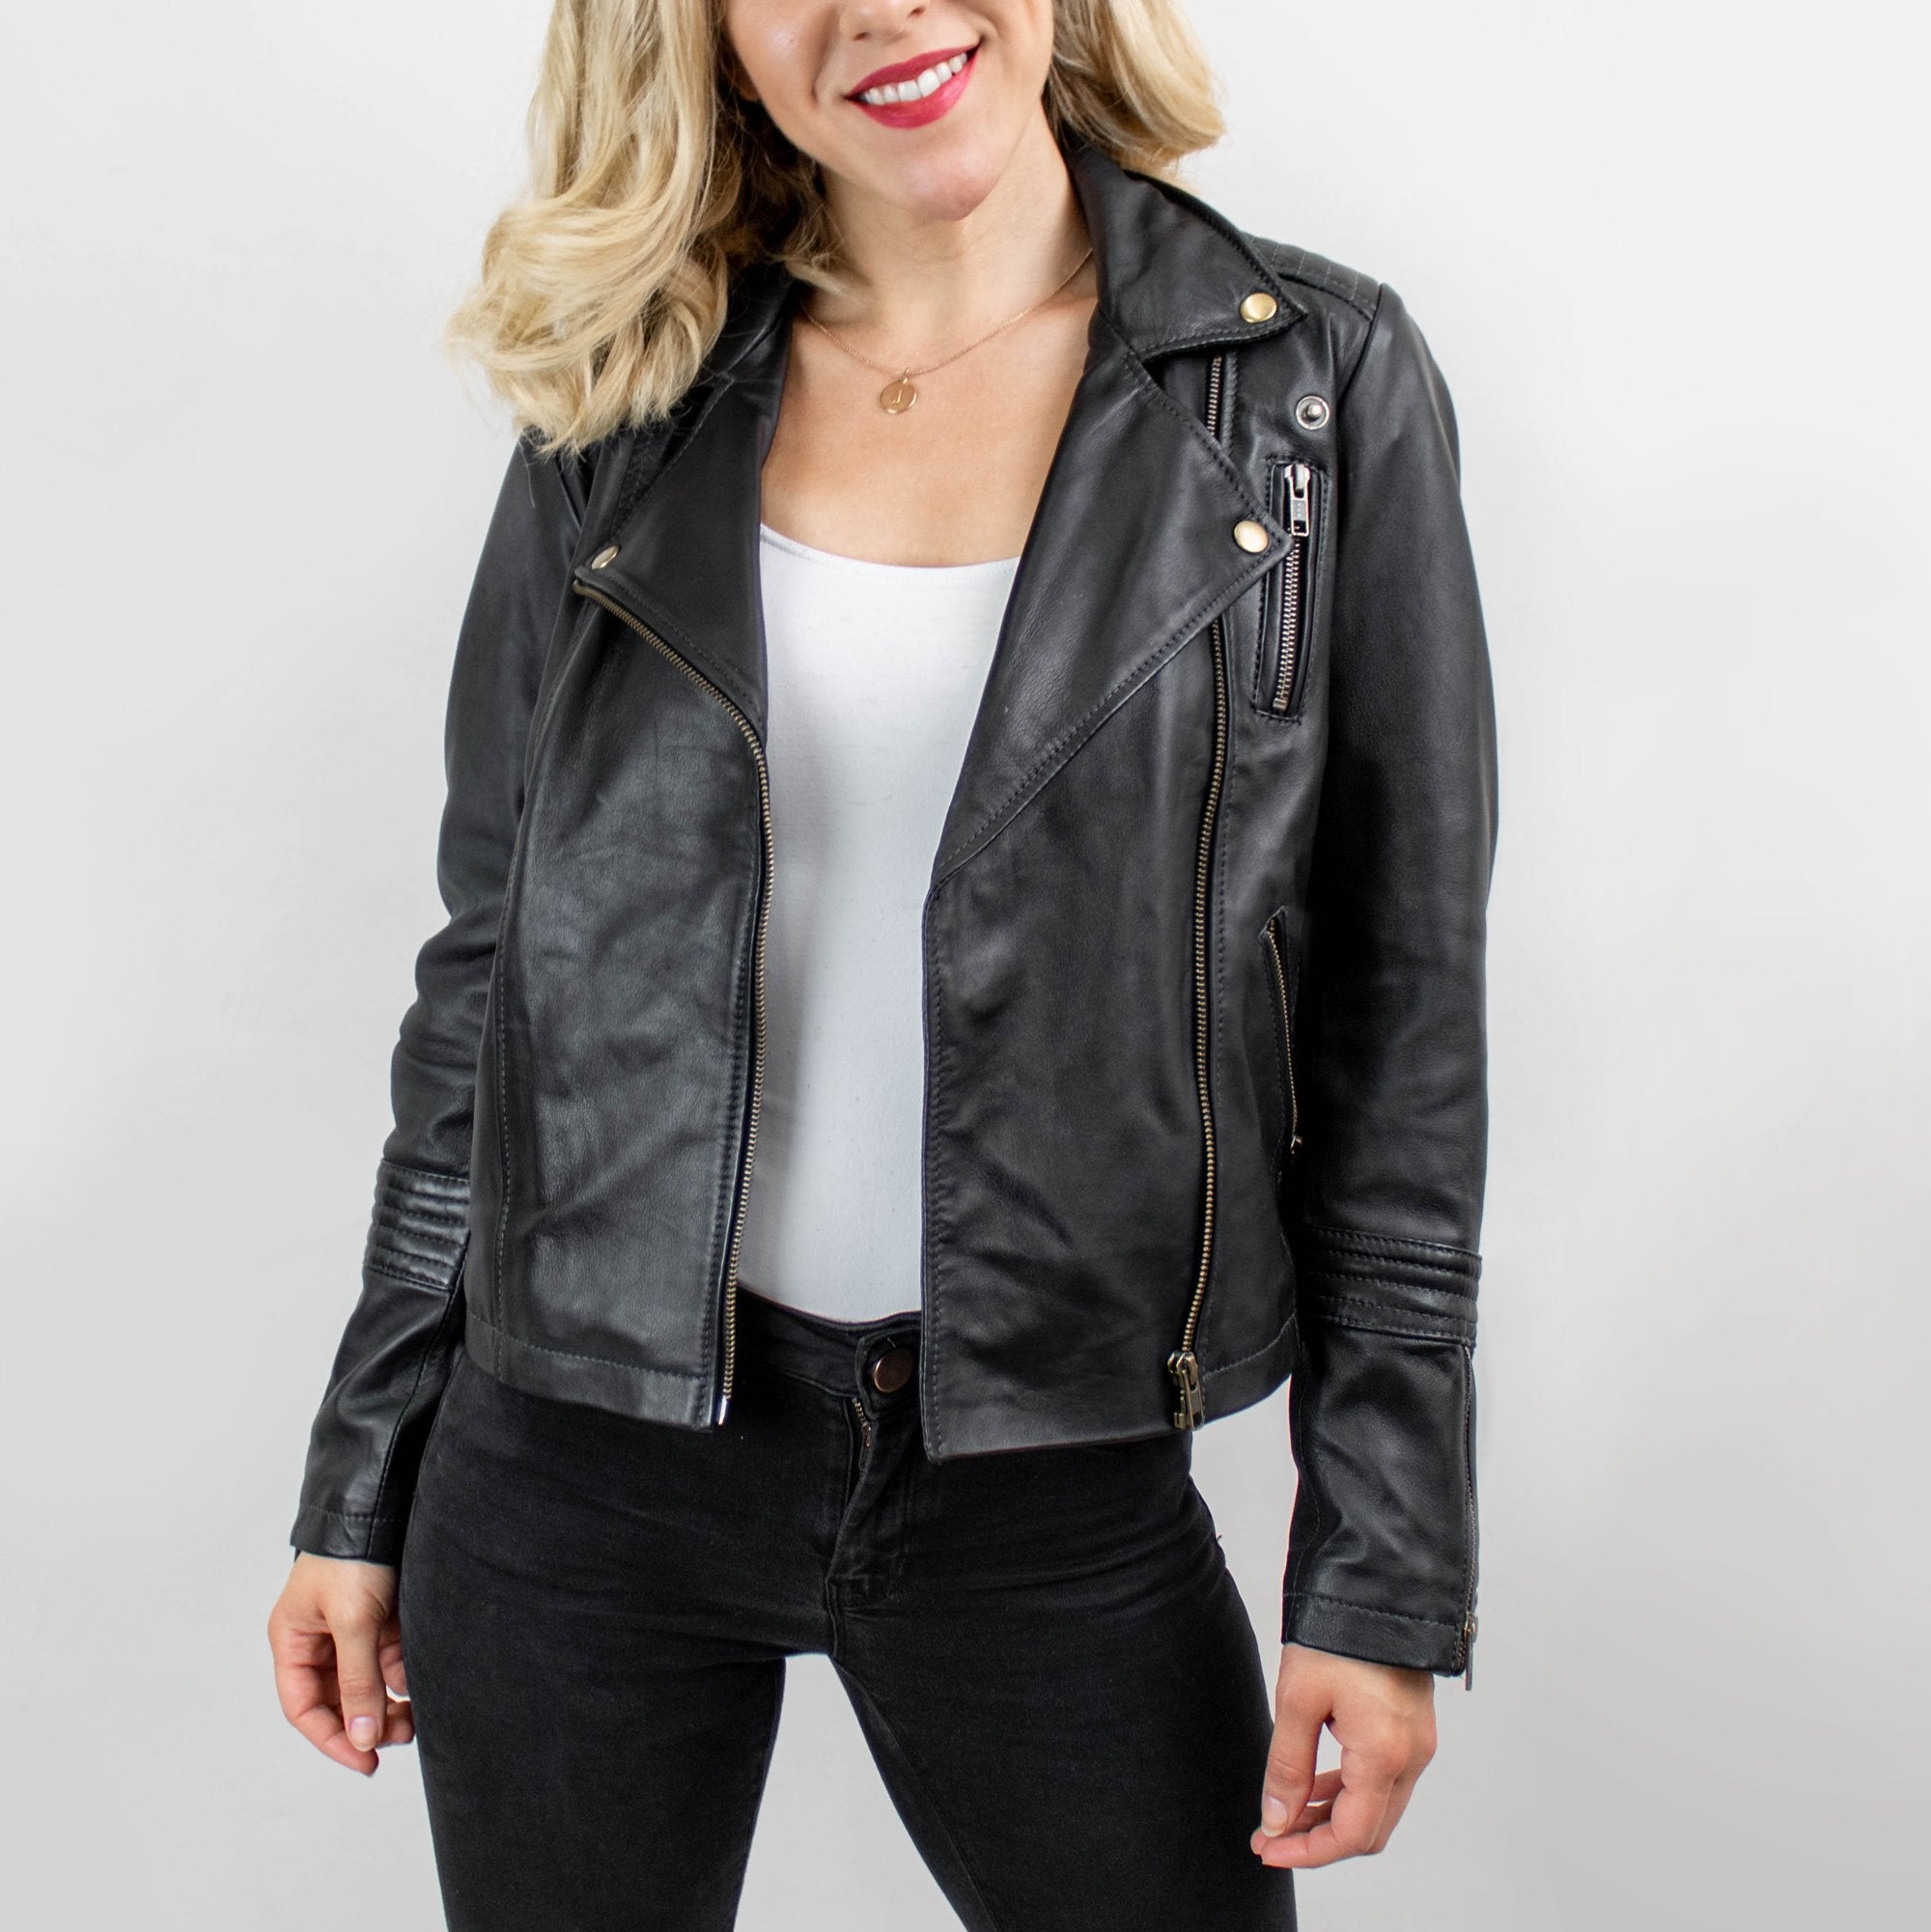 https://cdn.shopify.com/s/files/1/1116/1674/products/ladies-leather-biker-jacket-classic-quilted-detail-asymmetrical-zip.jpg?v=1601298757